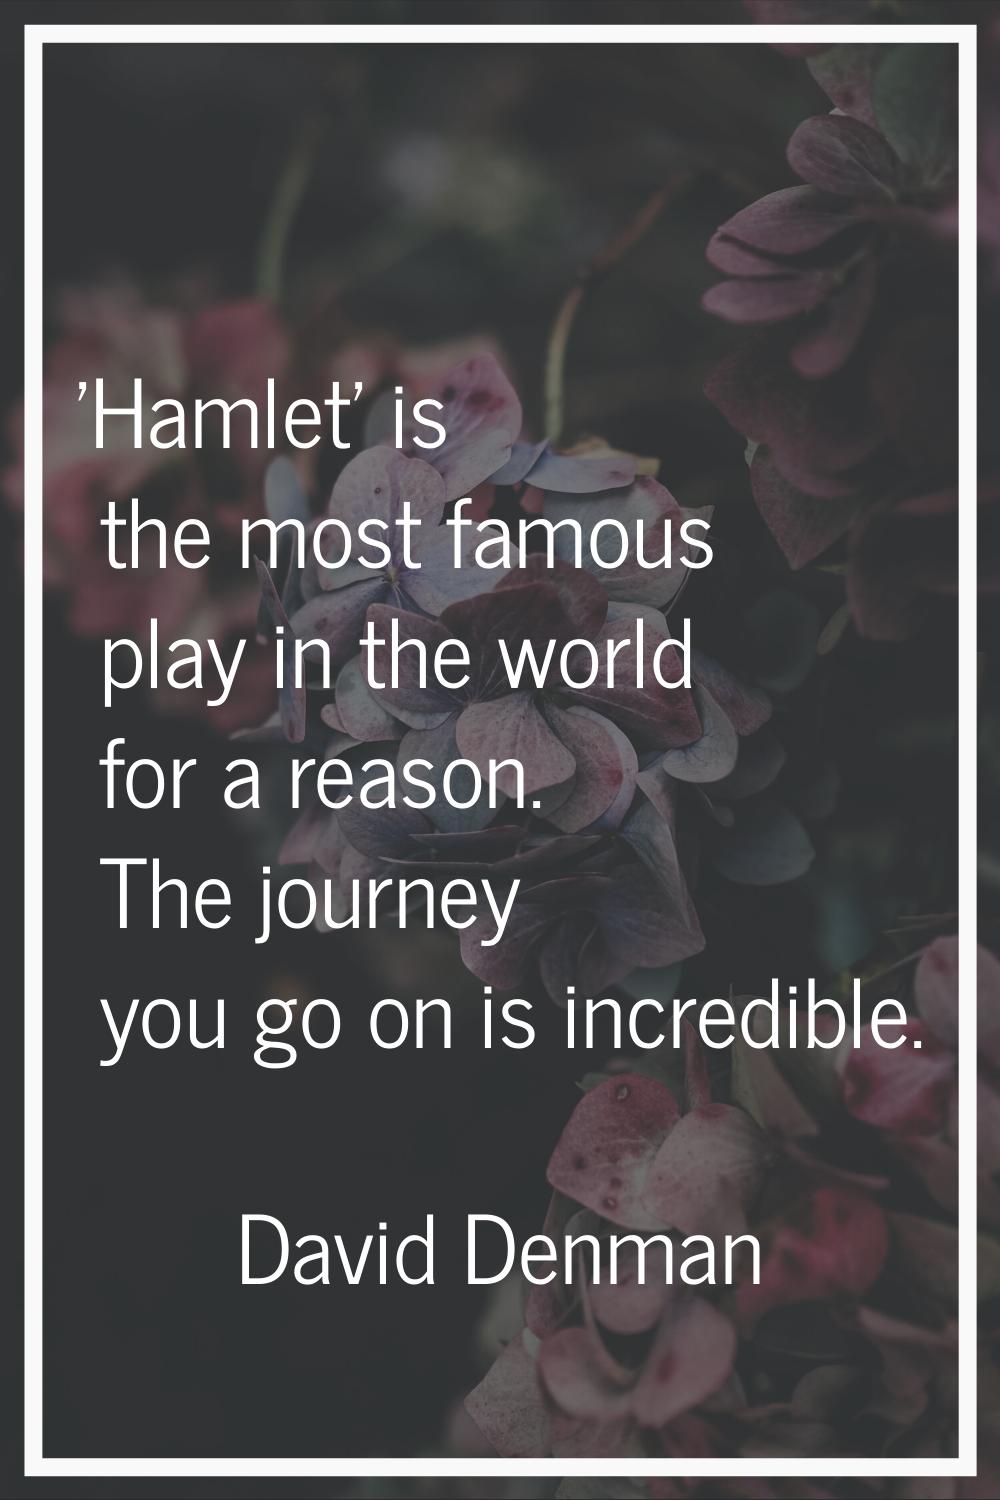 'Hamlet' is the most famous play in the world for a reason. The journey you go on is incredible.